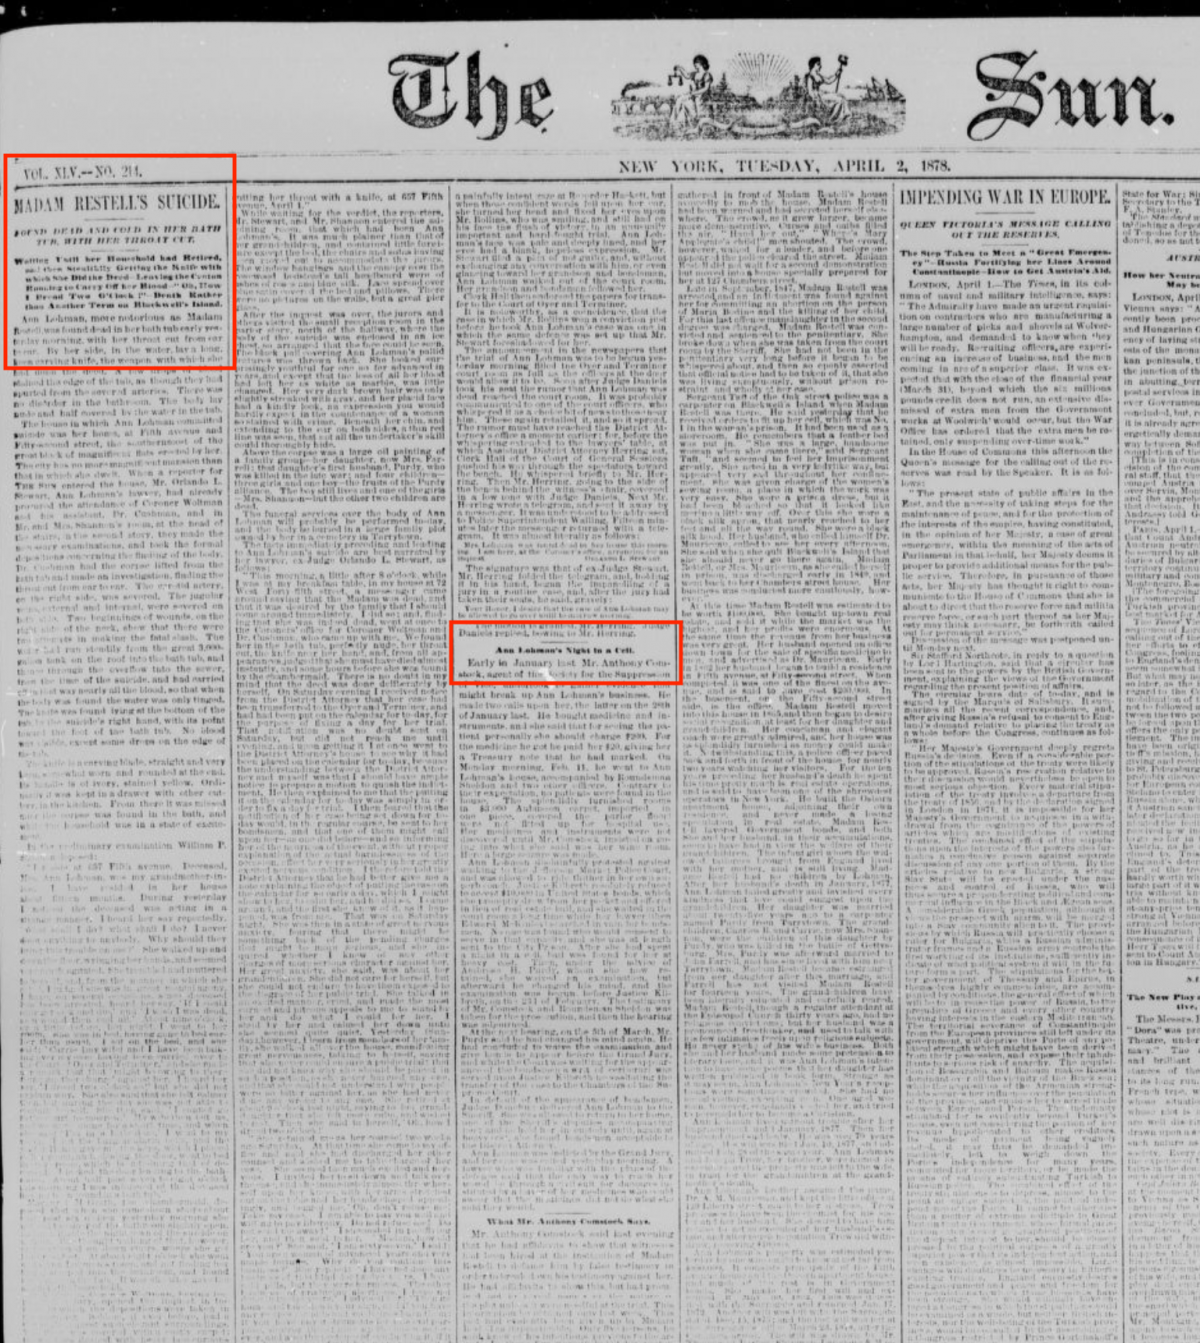 The first search result for “Ann Lohman” is this sensational report of “Madame Restell’s Suicide” that includes her married name, “Ann Lohman” interspersed with her alias, though her alias receives the headline. From the New York Sun, 8 April 1878.